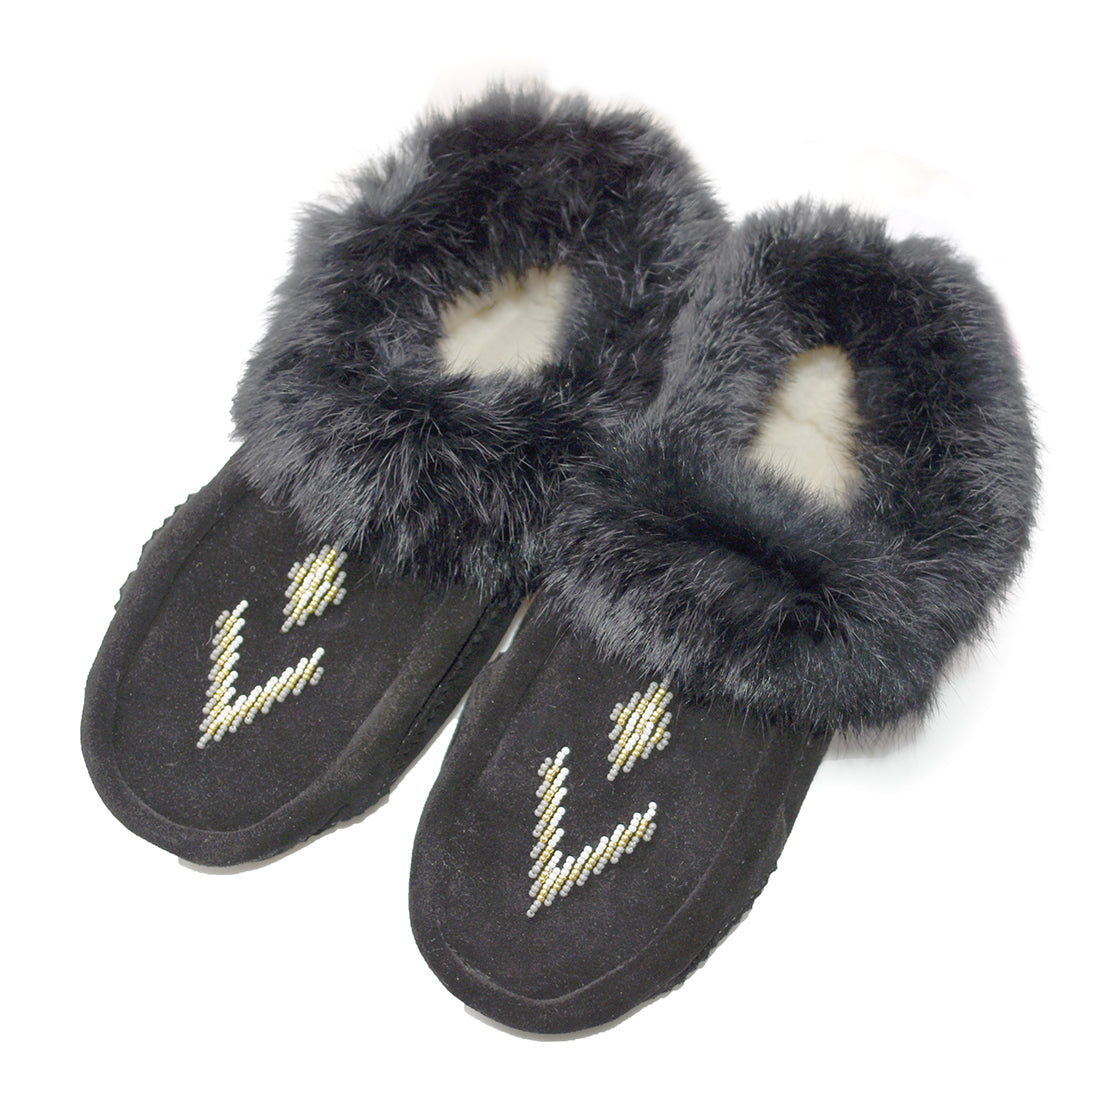 Millffy Native dechic slippers unisex Canadian-Made Moccasins leather slippers